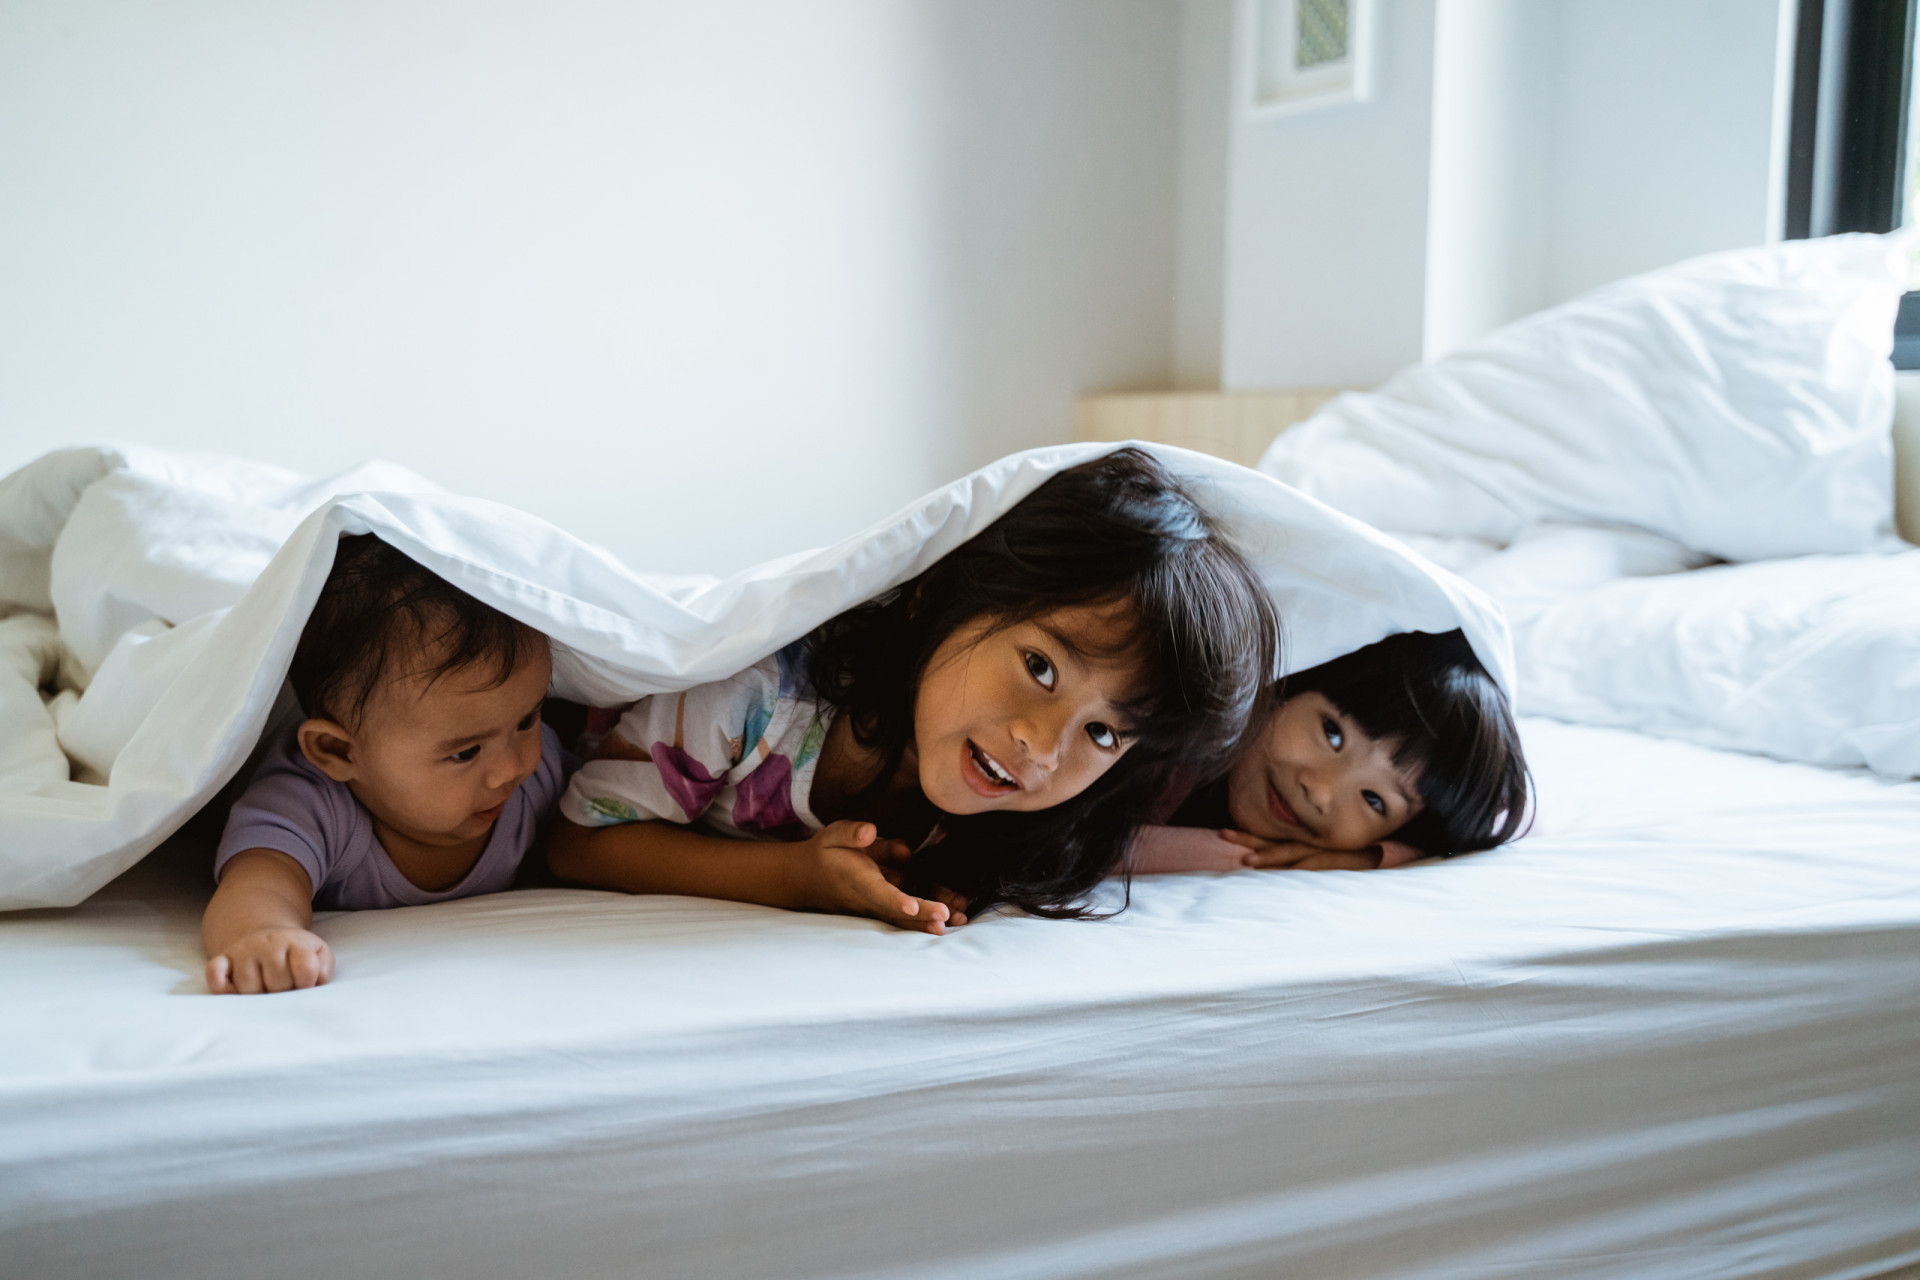 <p>Birth order refers to the rank of siblings in relation to their age. The way parents  assign roles to their children according to birth order might occur intentionally or unintentionally.</p><p><a href="https://www.msn.com/en-us/community/channel/vid-7xx8mnucu55yw63we9va2gwr7uihbxwc68fxqp25x6tg4ftibpra?cvid=94631541bc0f4f89bfd59158d696ad7e">Follow us and access great exclusive content every day</a></p>